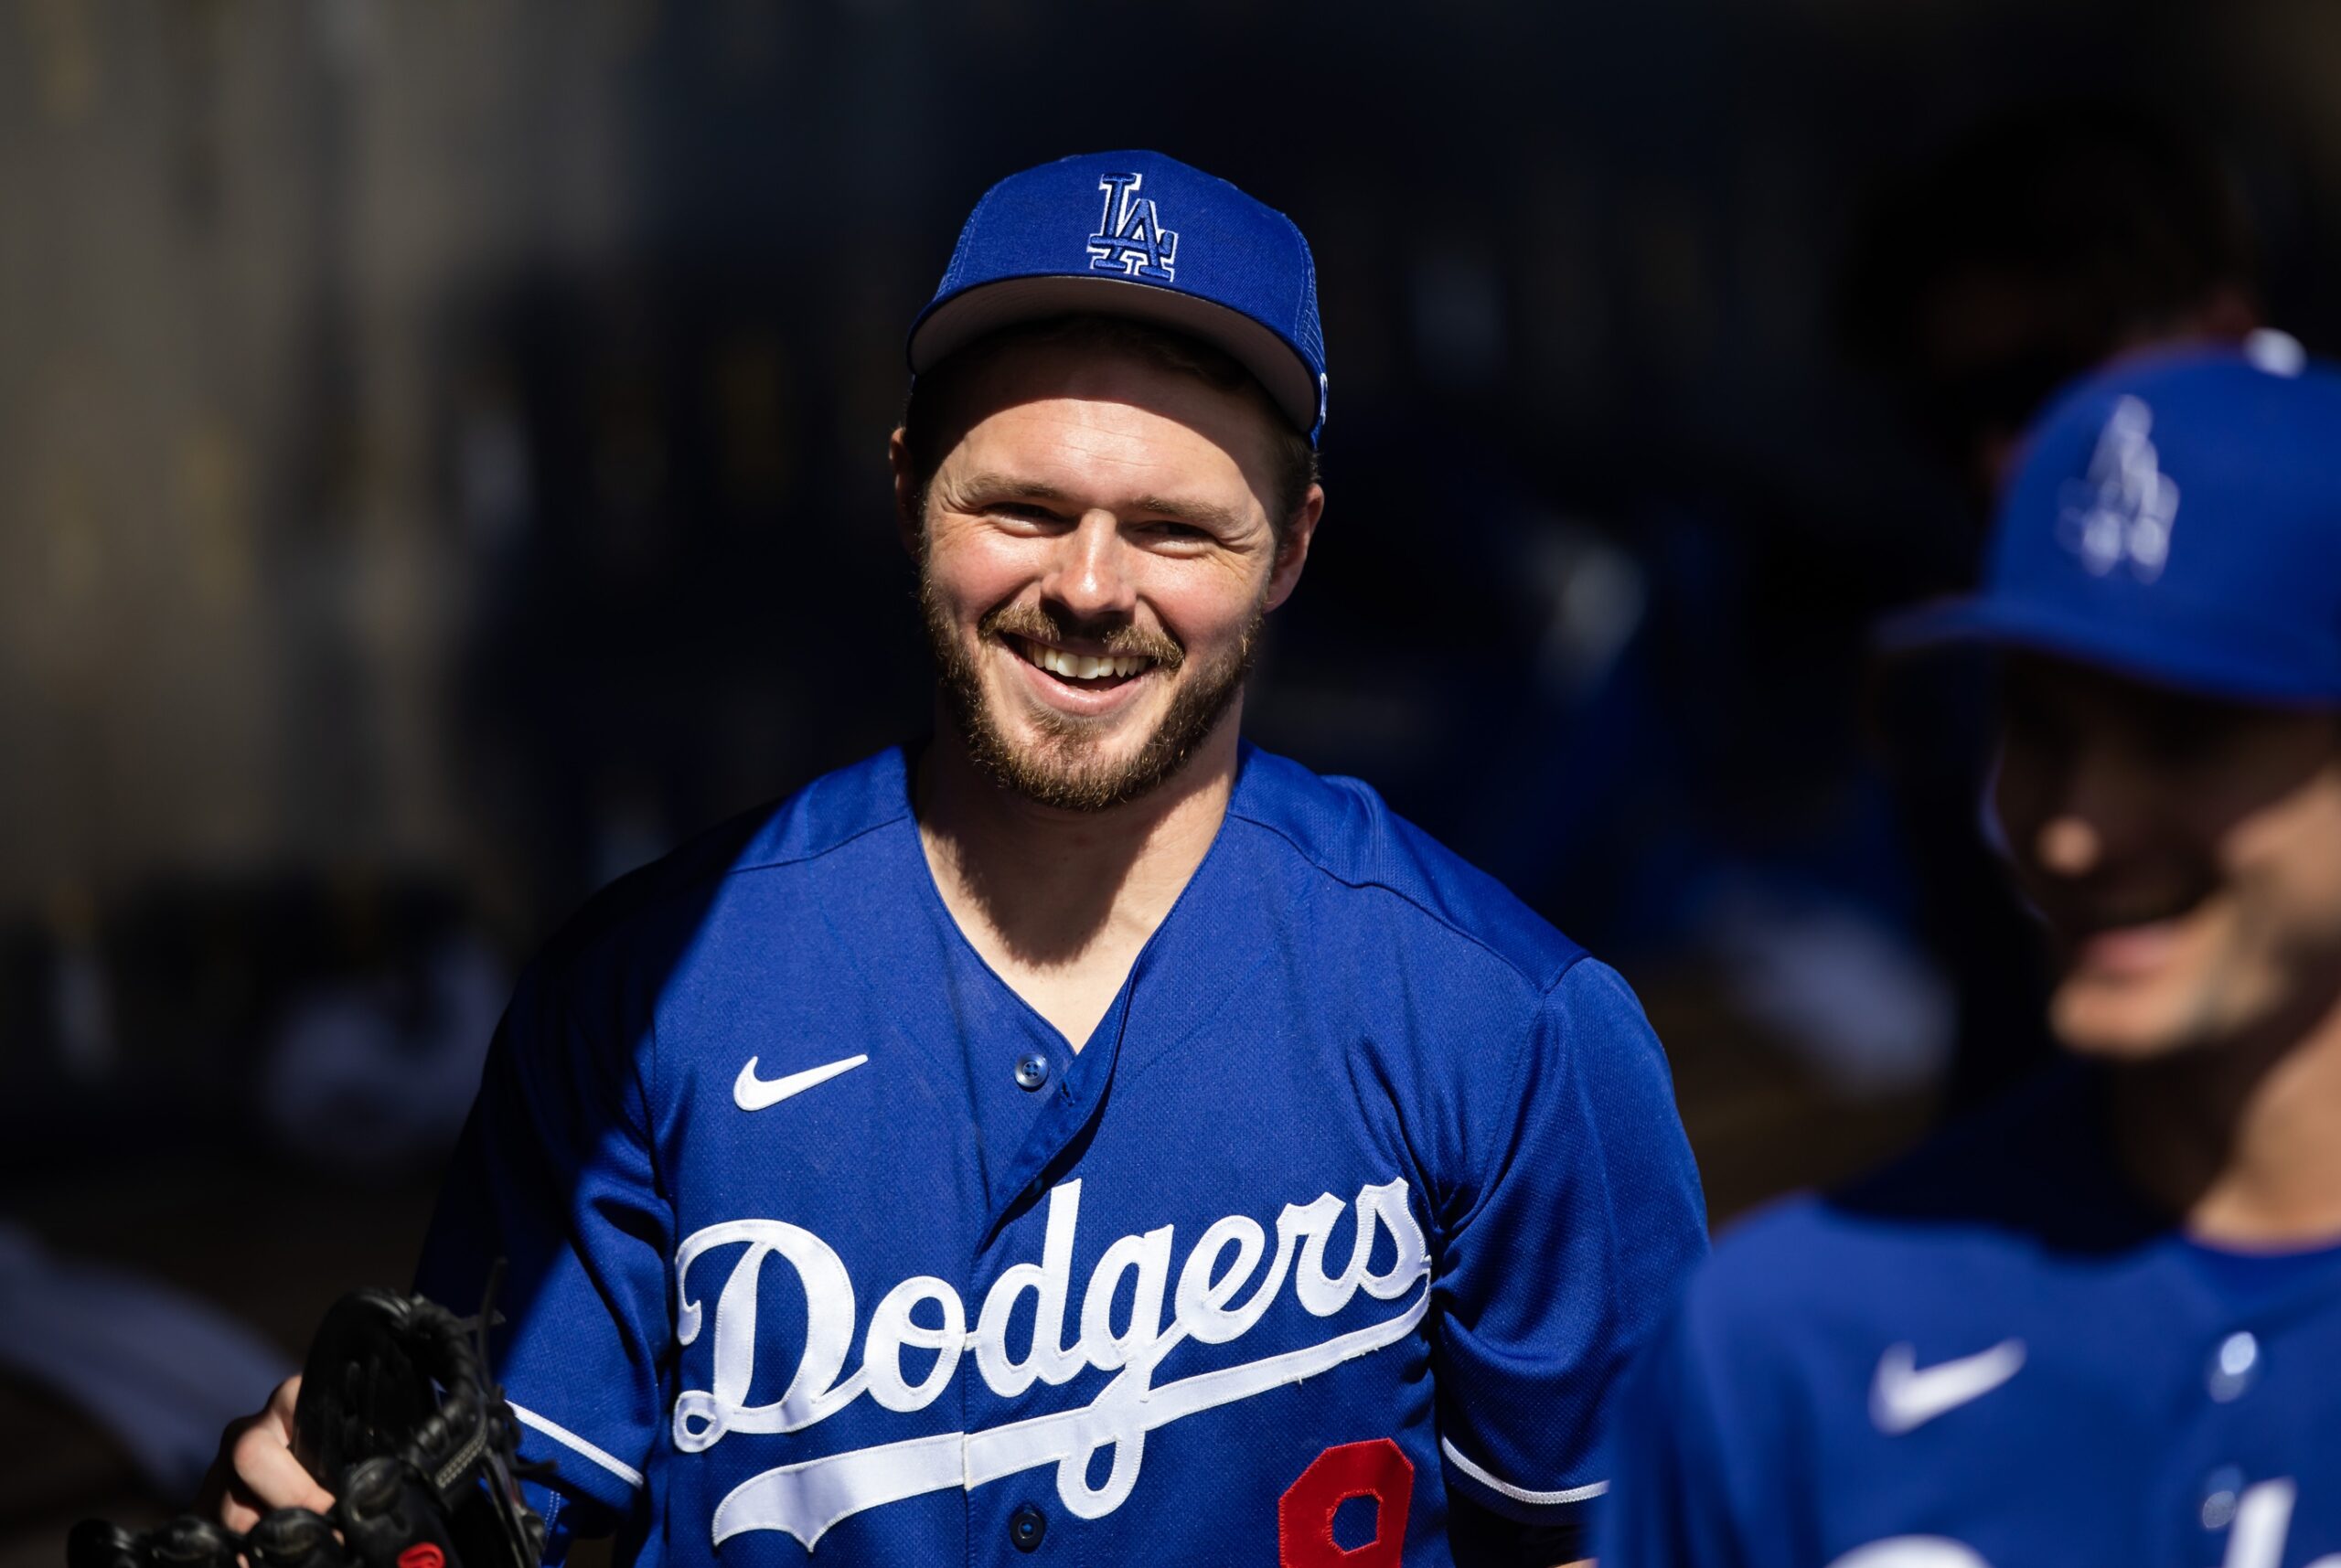 Dodgers' Gavin Lux carted off field after awkwardly injuring knee